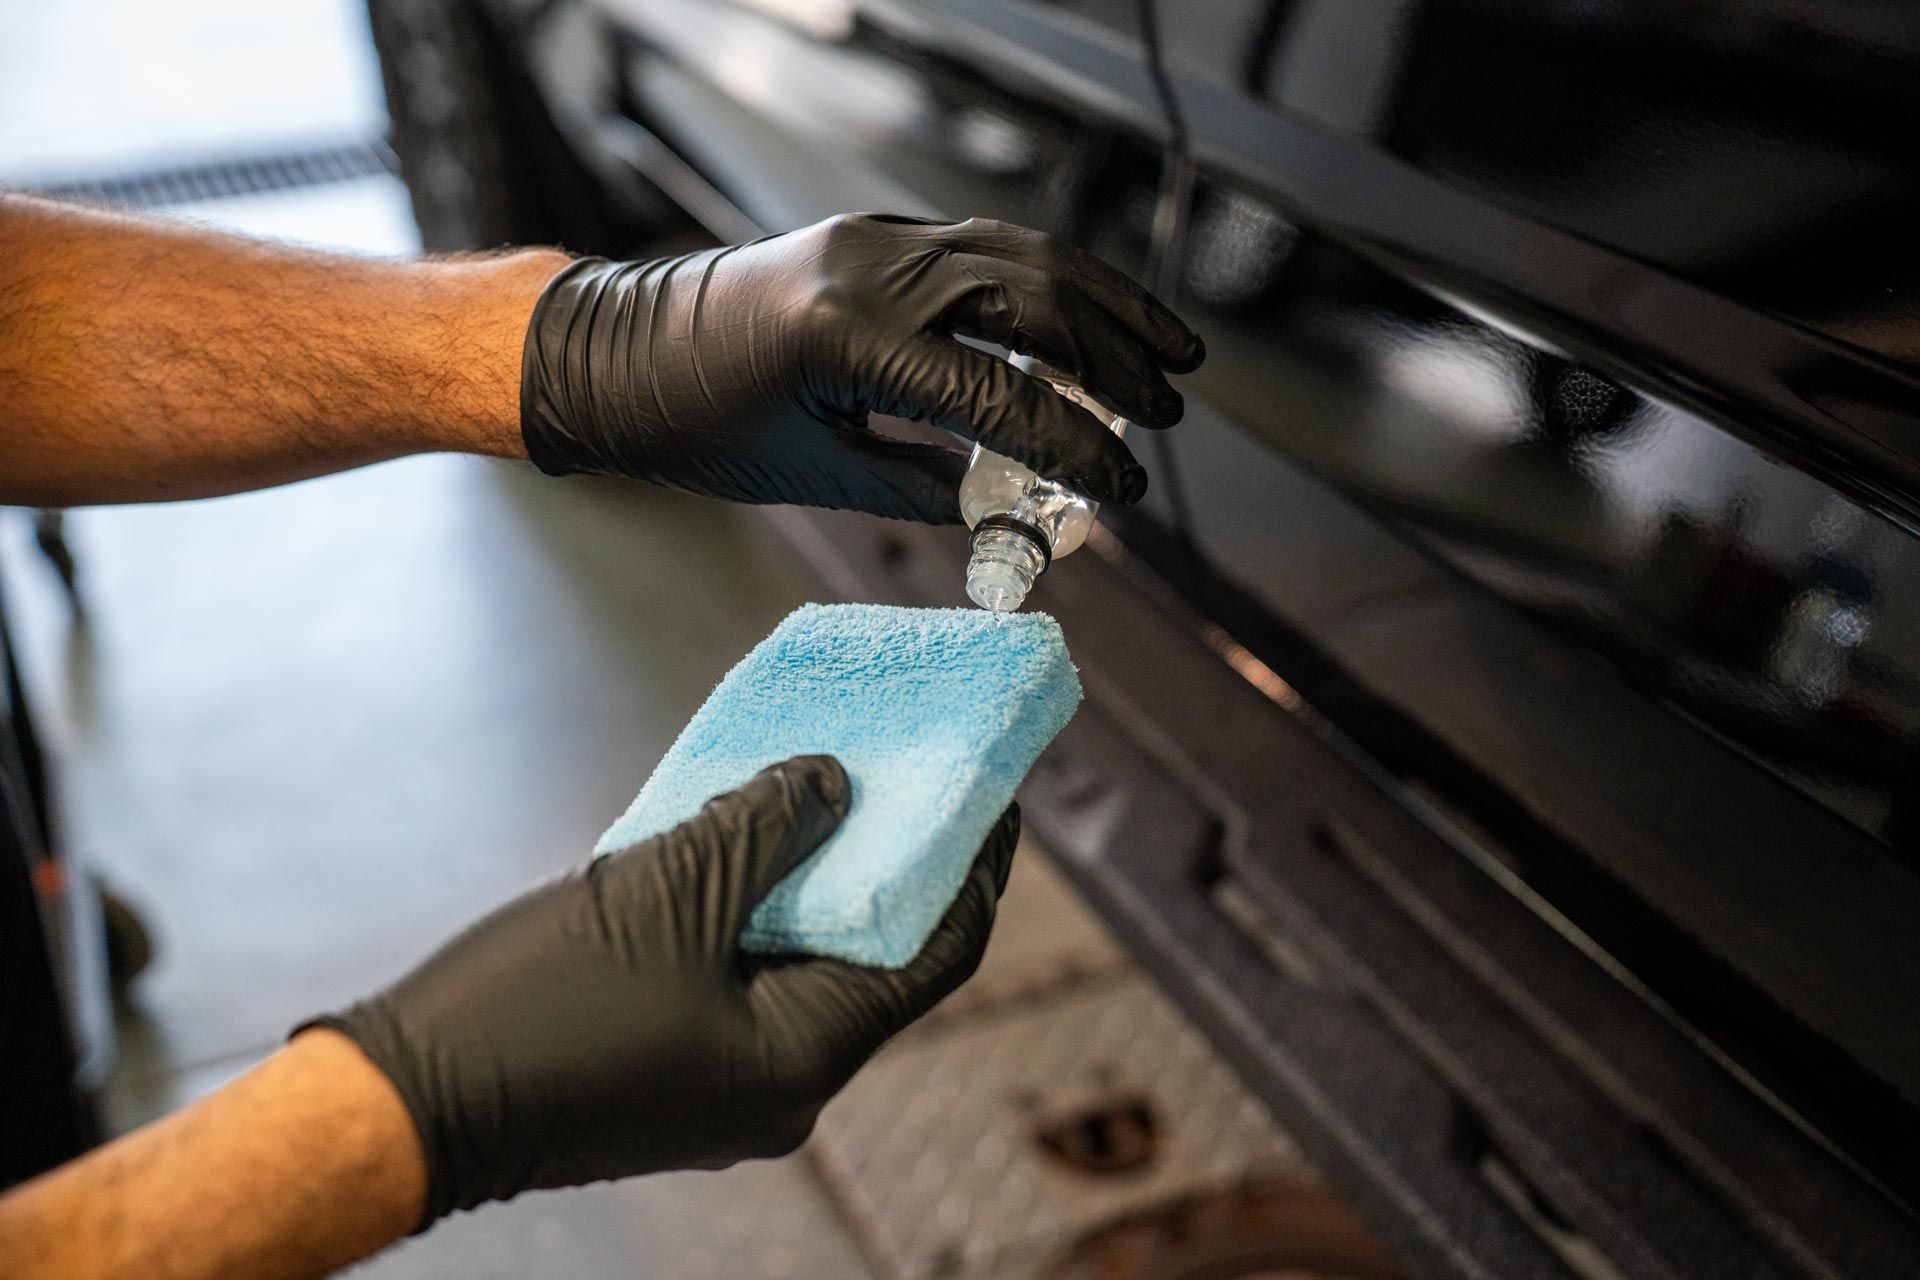 A person wearing black gloves is cleaning a car with a blue sponge for Ceramic Coating